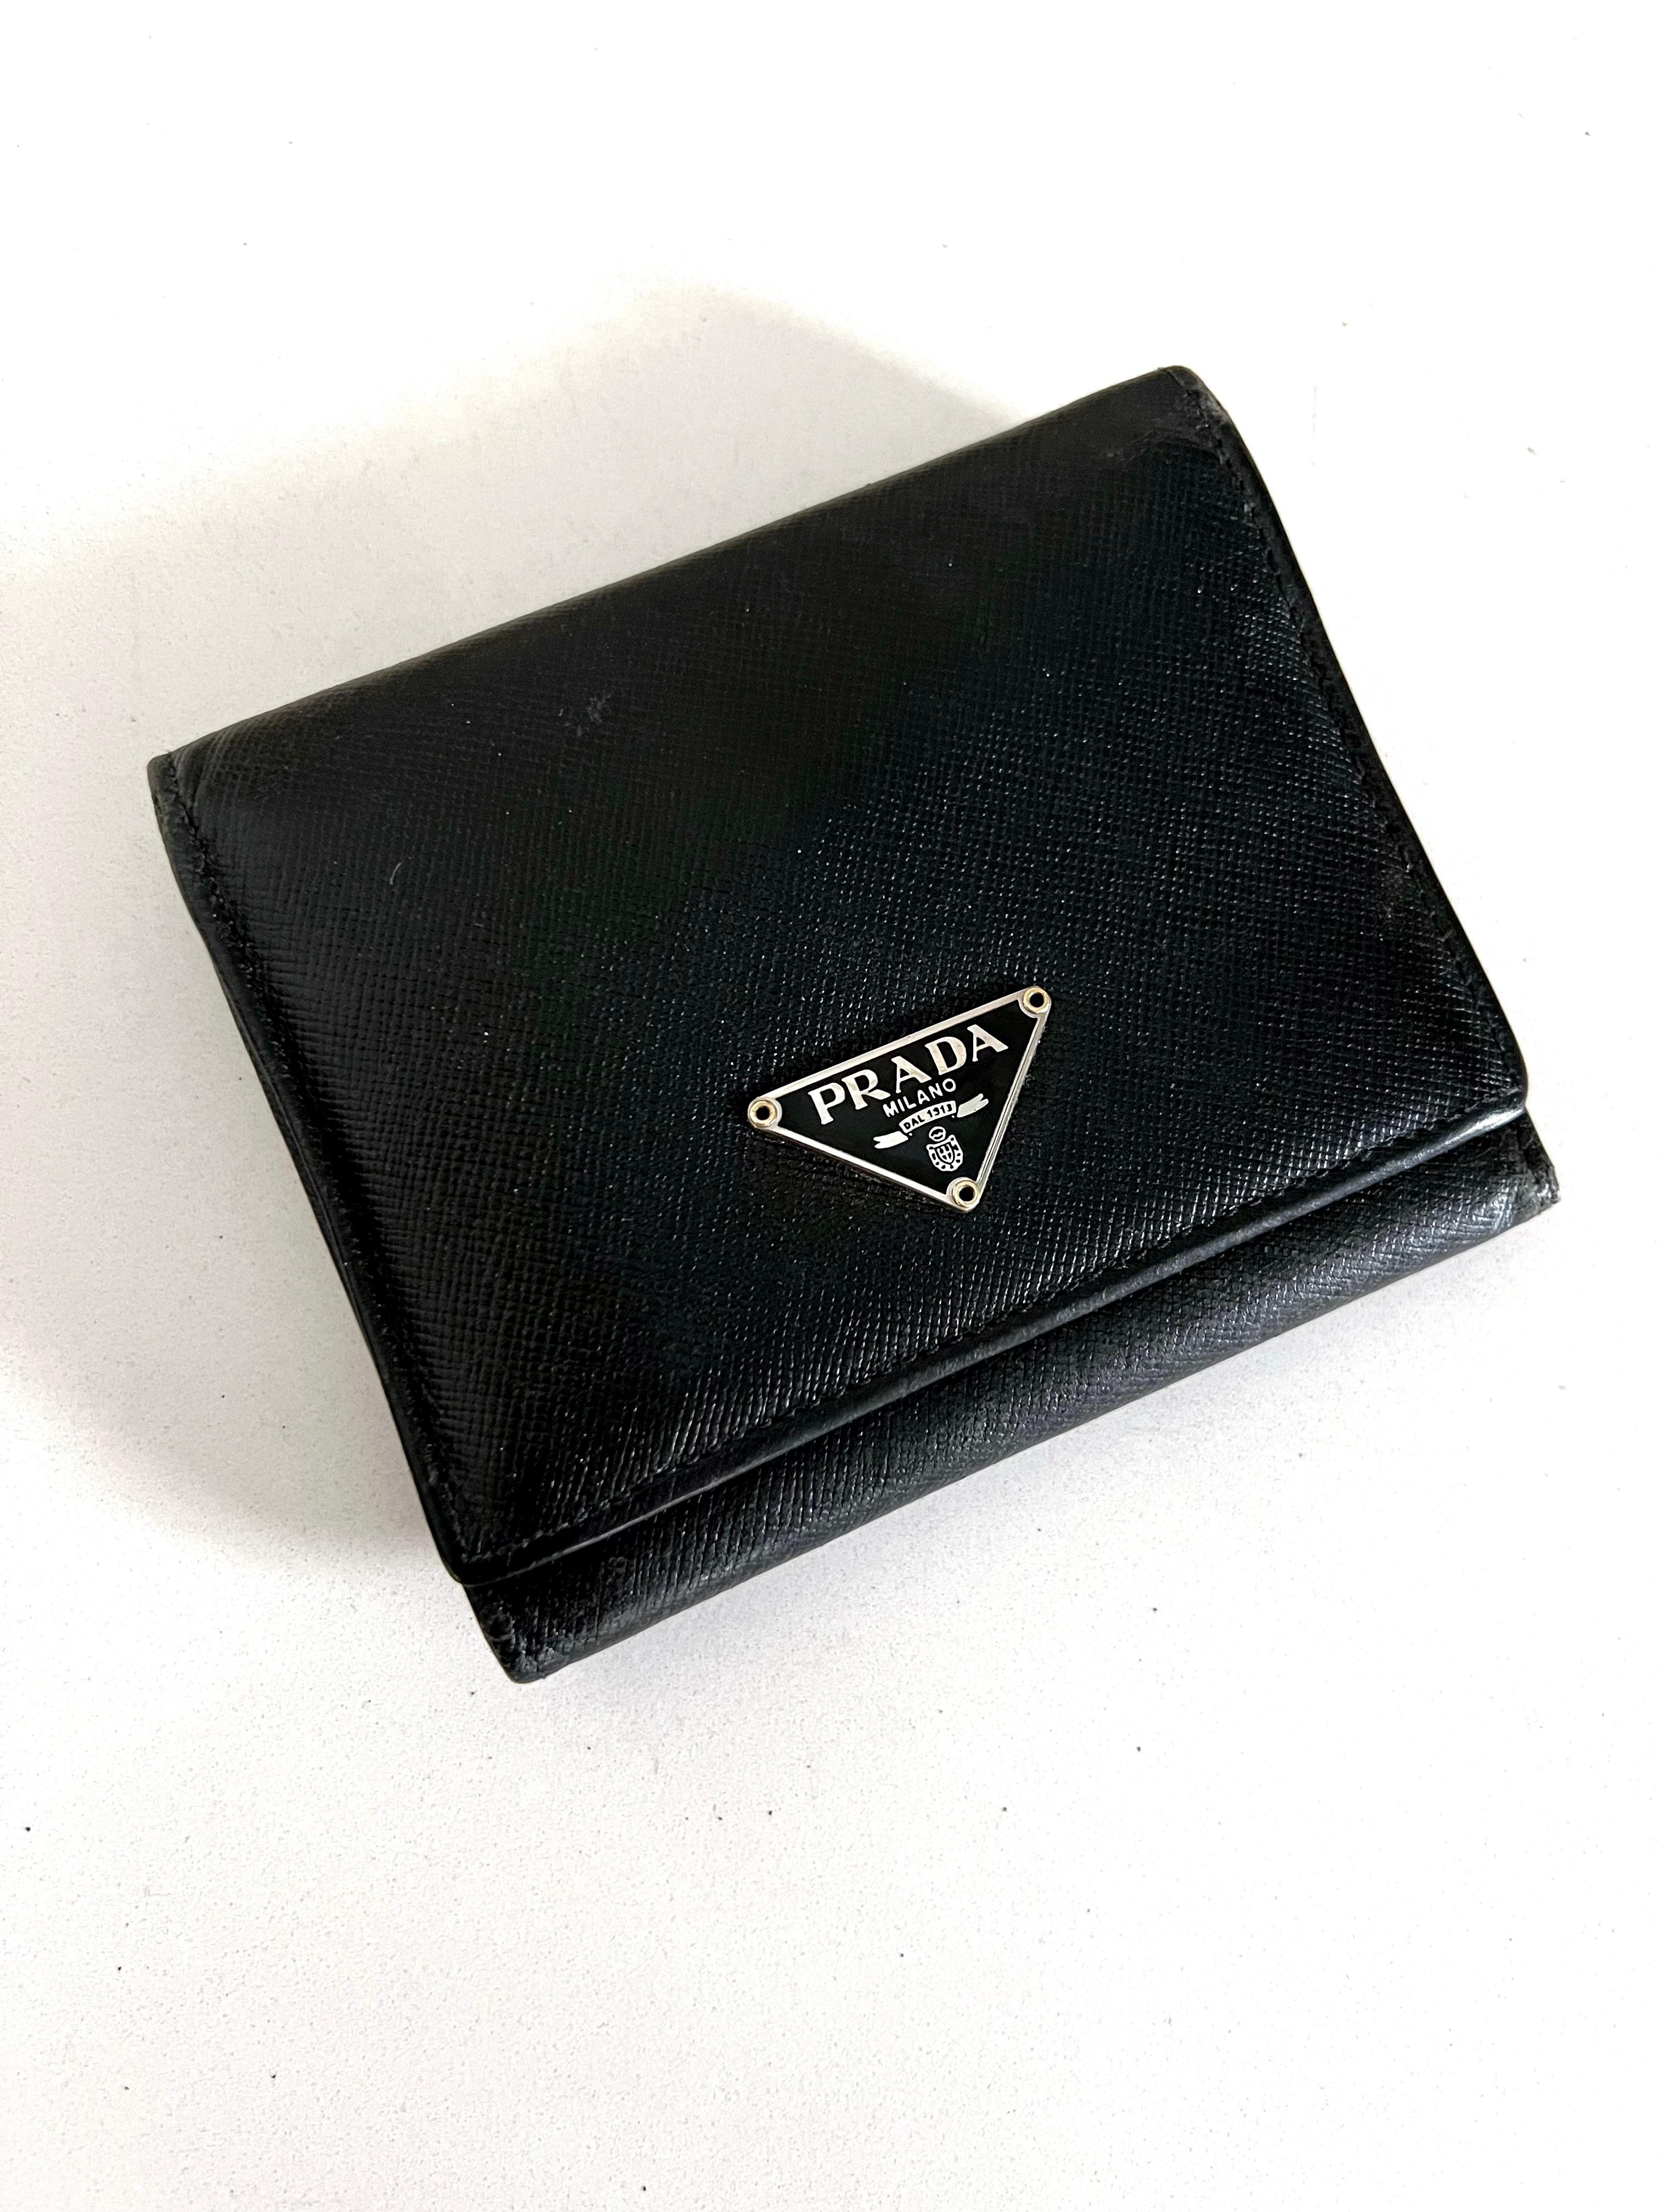 A wonderful and family un-used Prada Wallet... a more traditional mans size wallet, but great for anyone! The wallet easily holds, bills, change and has room for 6 credit cards and spaces for things like car registration, insurance cards, etc. a